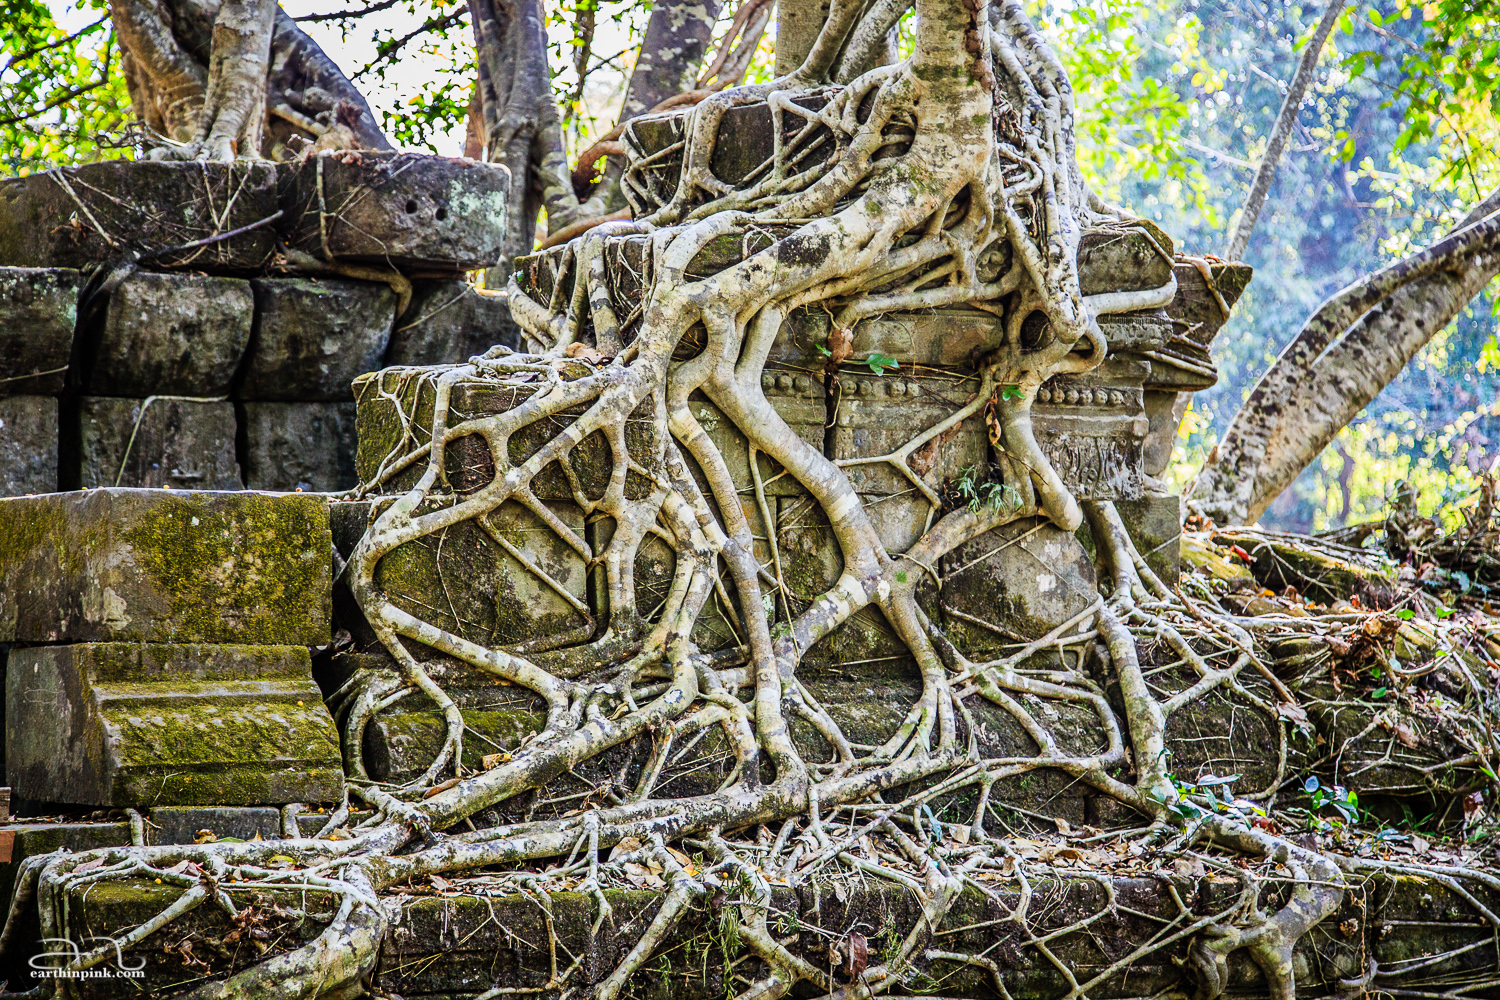 The jungle taking over the ruins of the Beng Mealea temple.